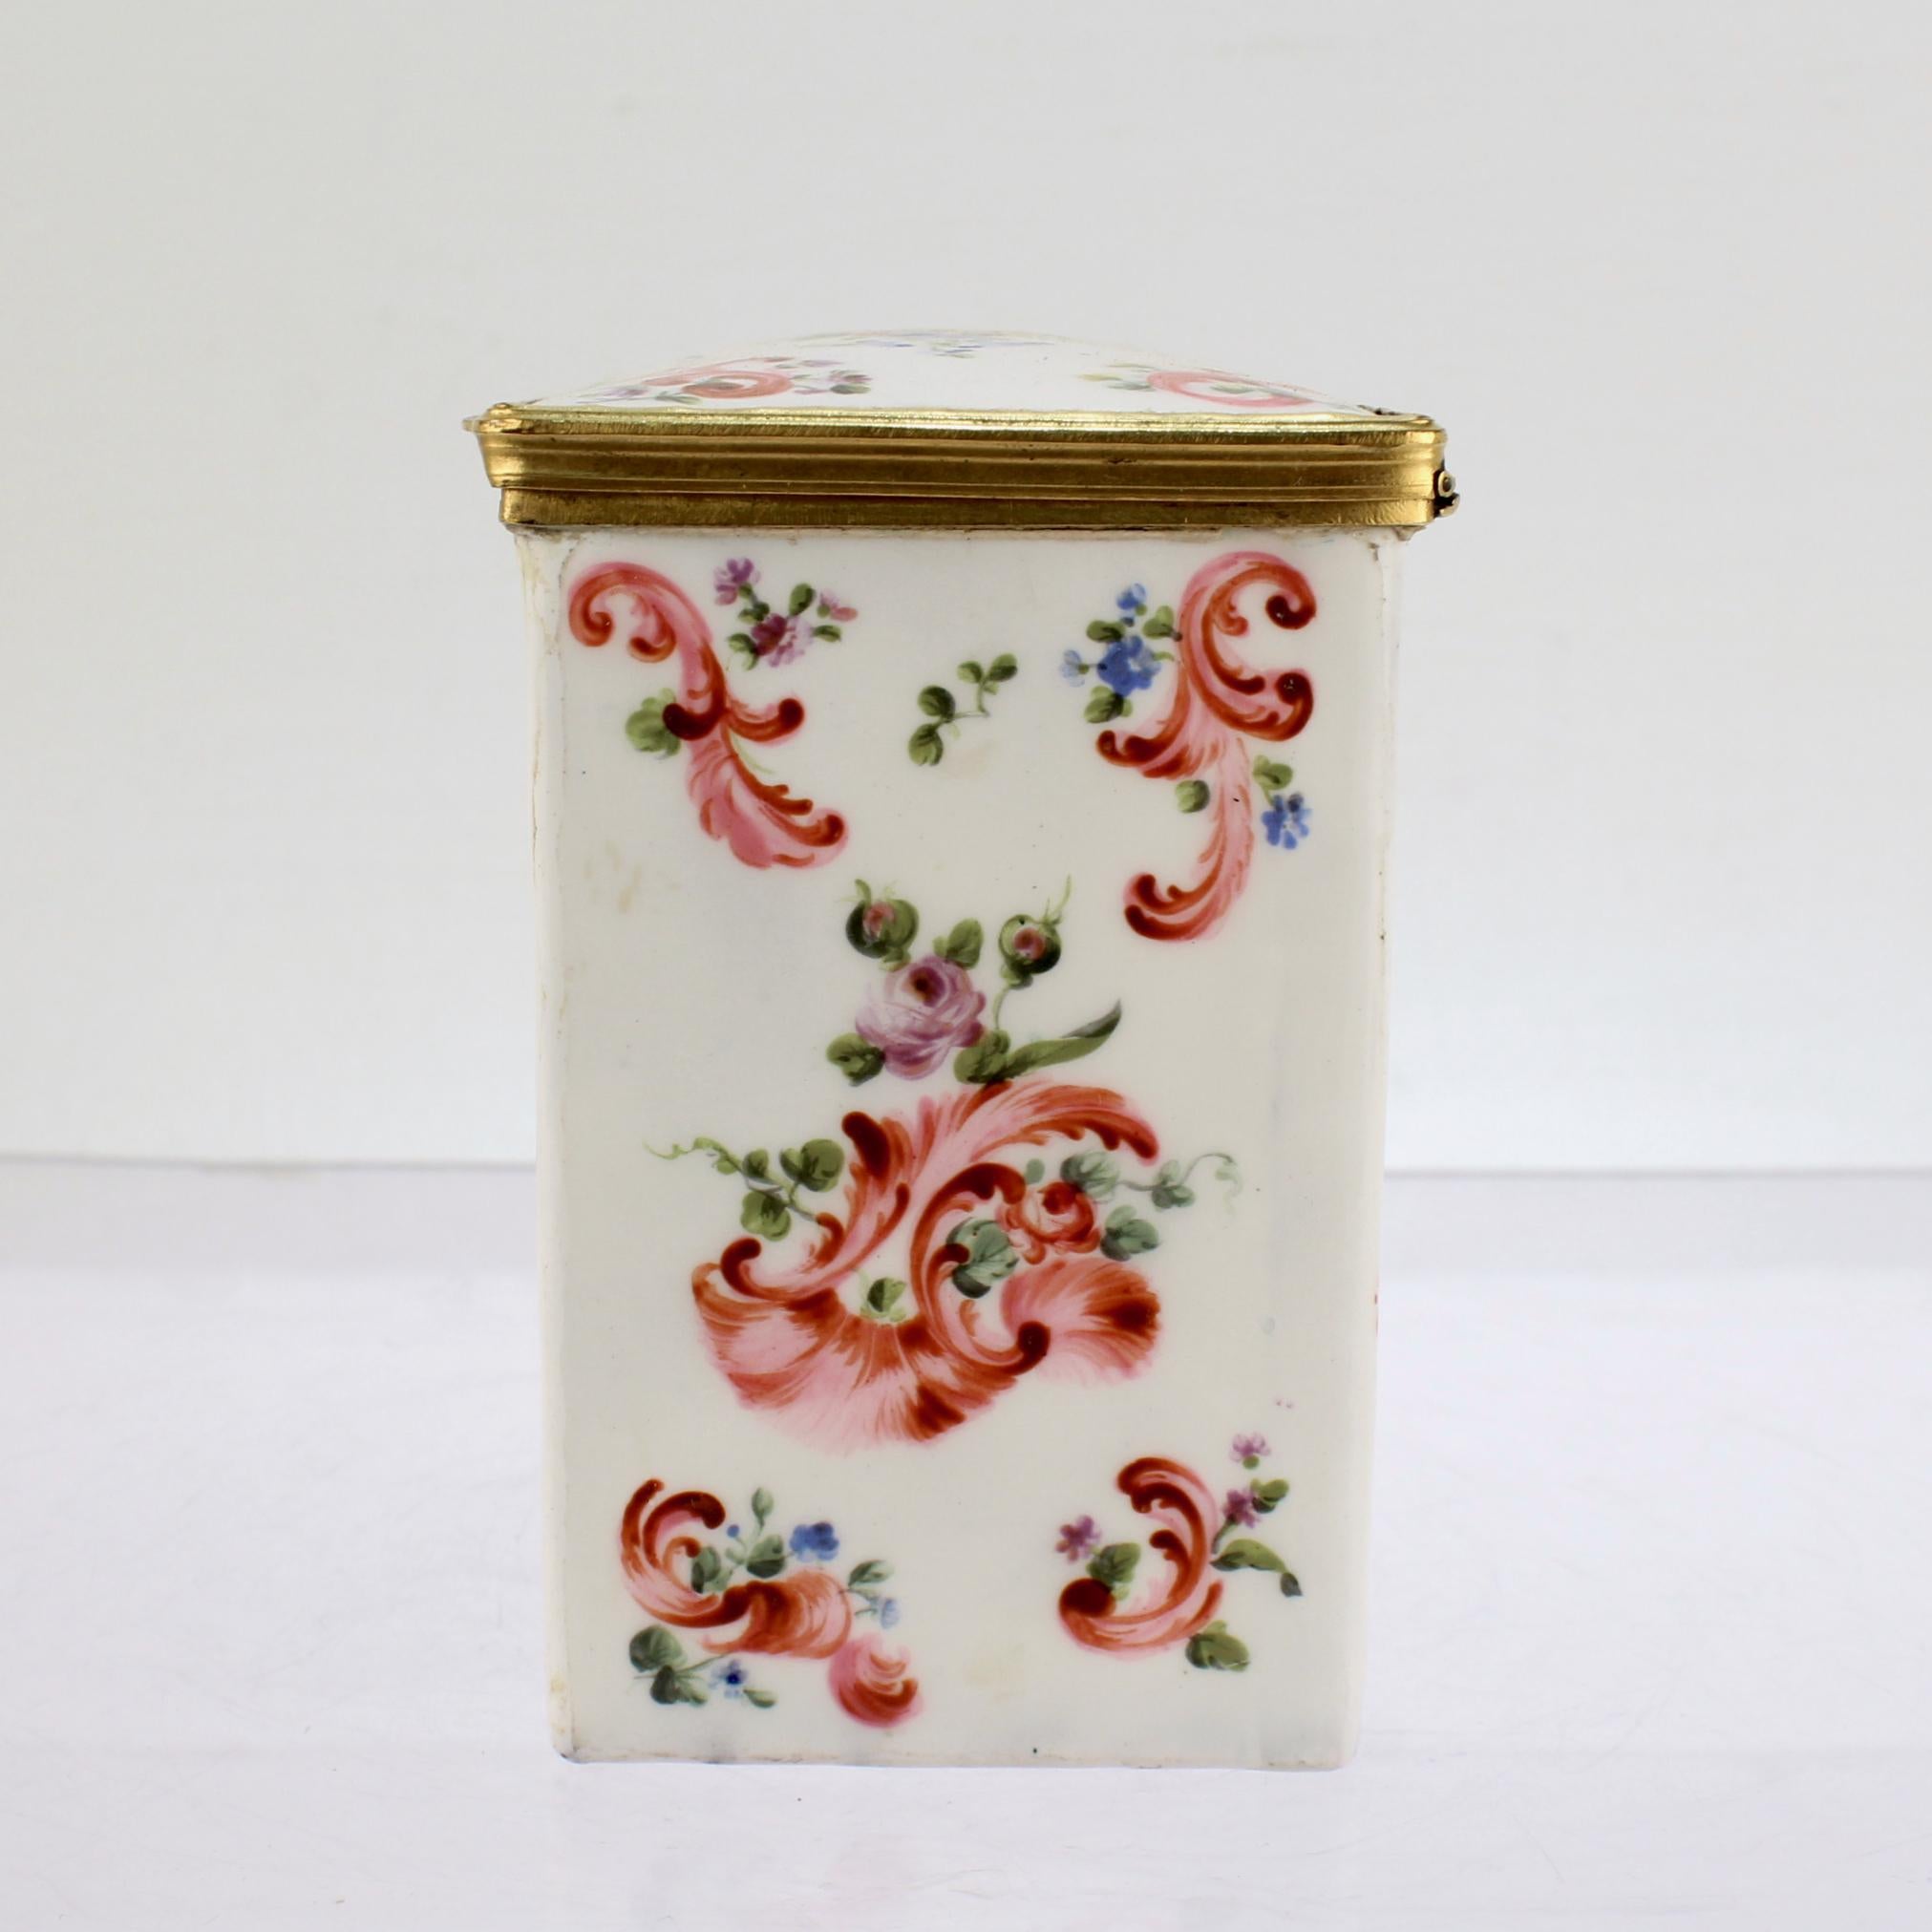 19th Century Antique 18c/19c English or French Enamel Bronze Mounted Tea Caddy Box For Sale